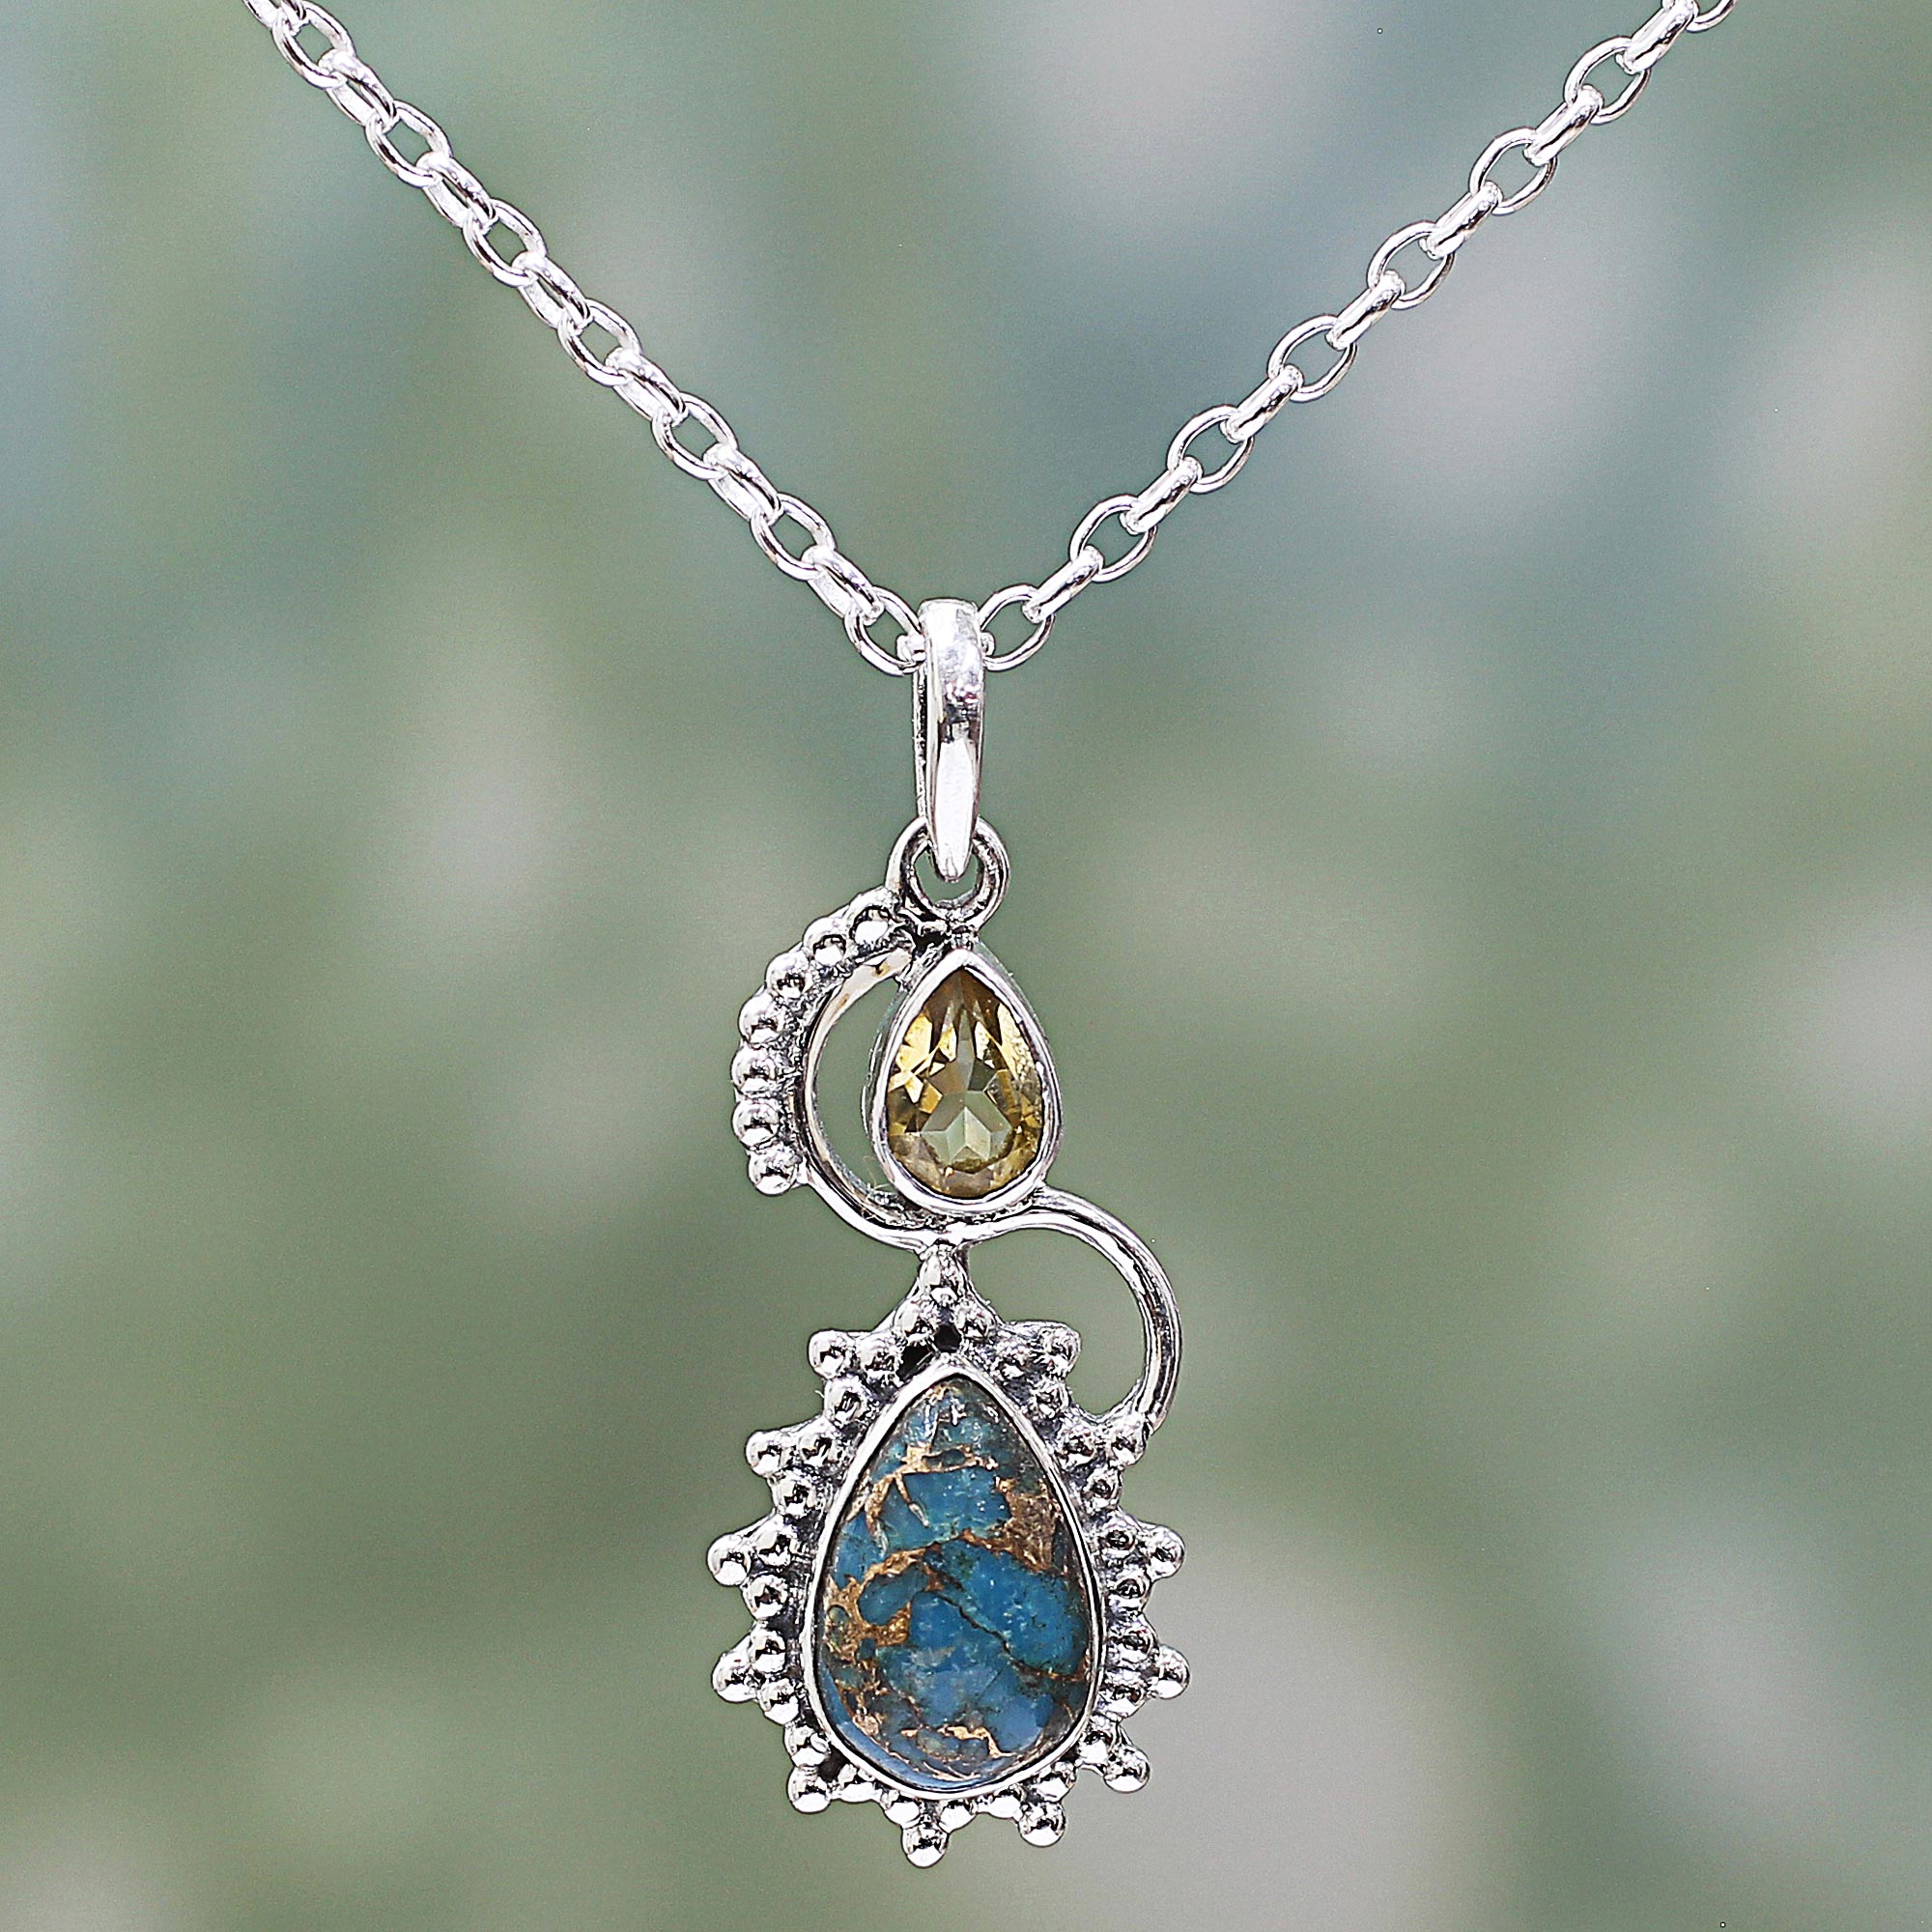 Sparkling Drop Citrine Composite Turquoise Pendant Necklace from India Necklace for your neckline